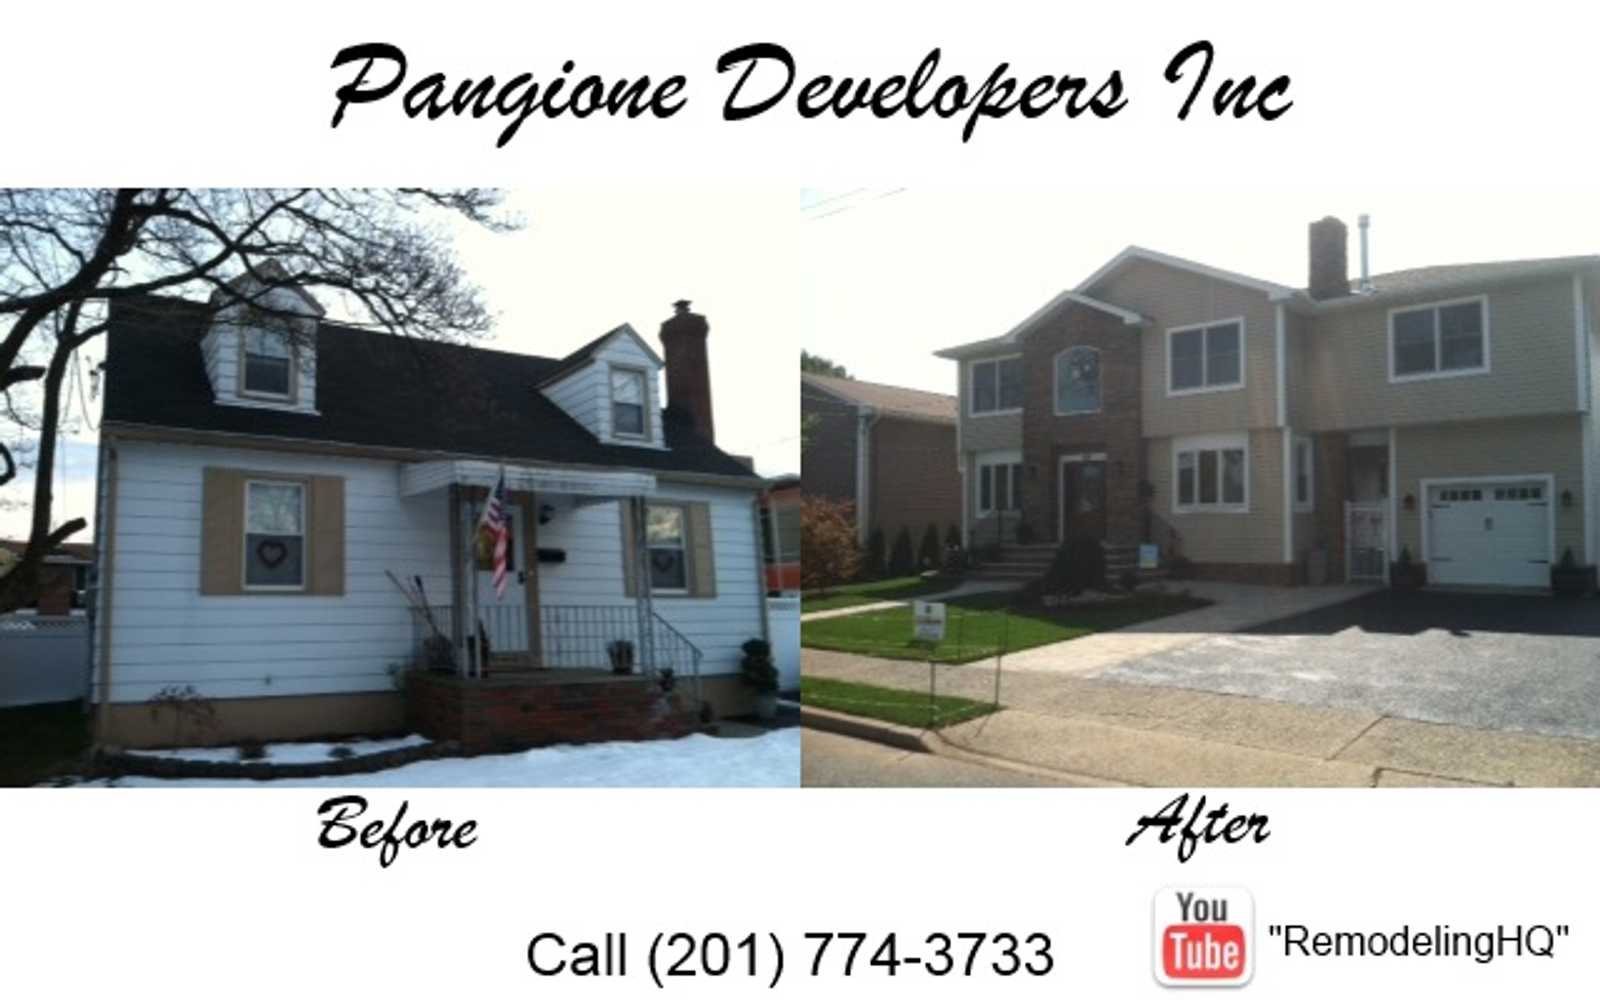 Photo(s) from Pangione Developers Inc